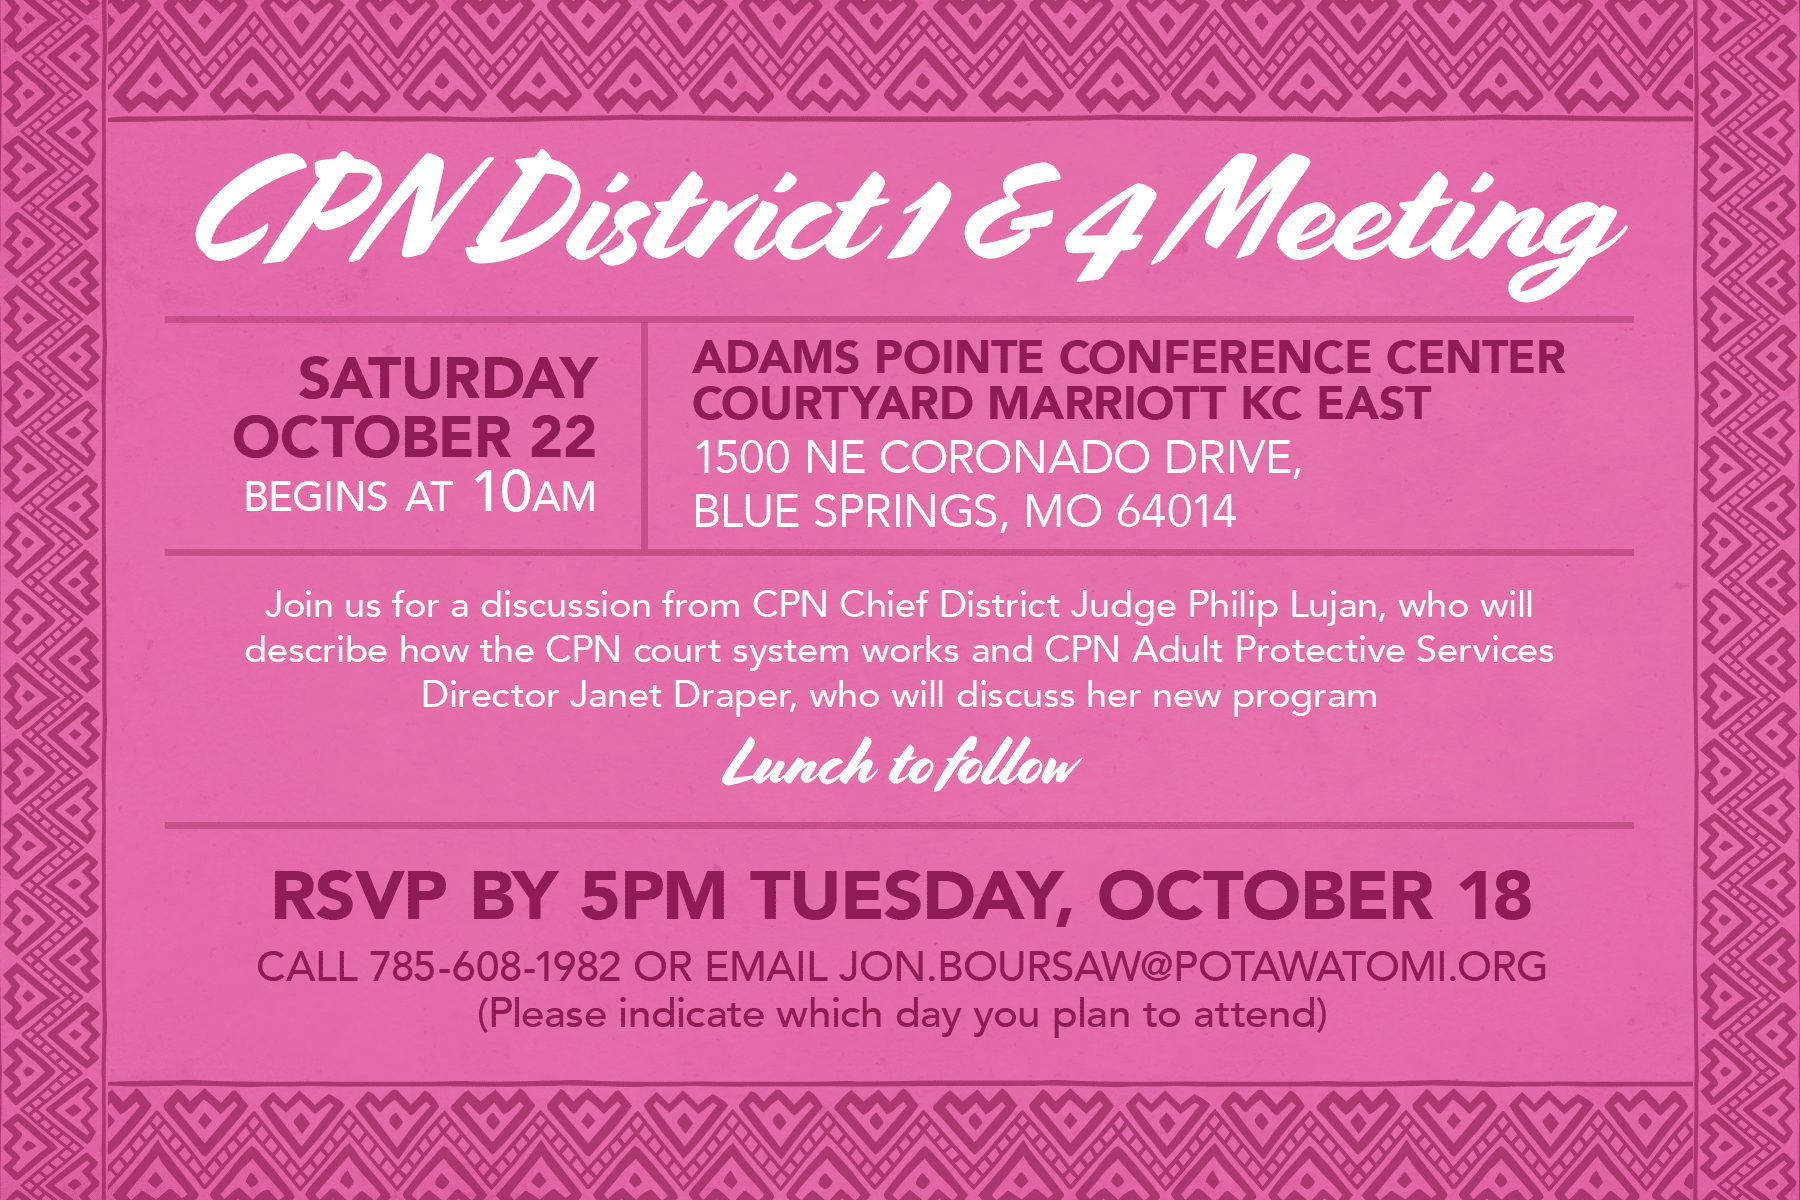 Pink postcard with geometric patterns around the borders inviting CPN Tribal members to a District 1 & District 4 Meeting on October 22, 2022.